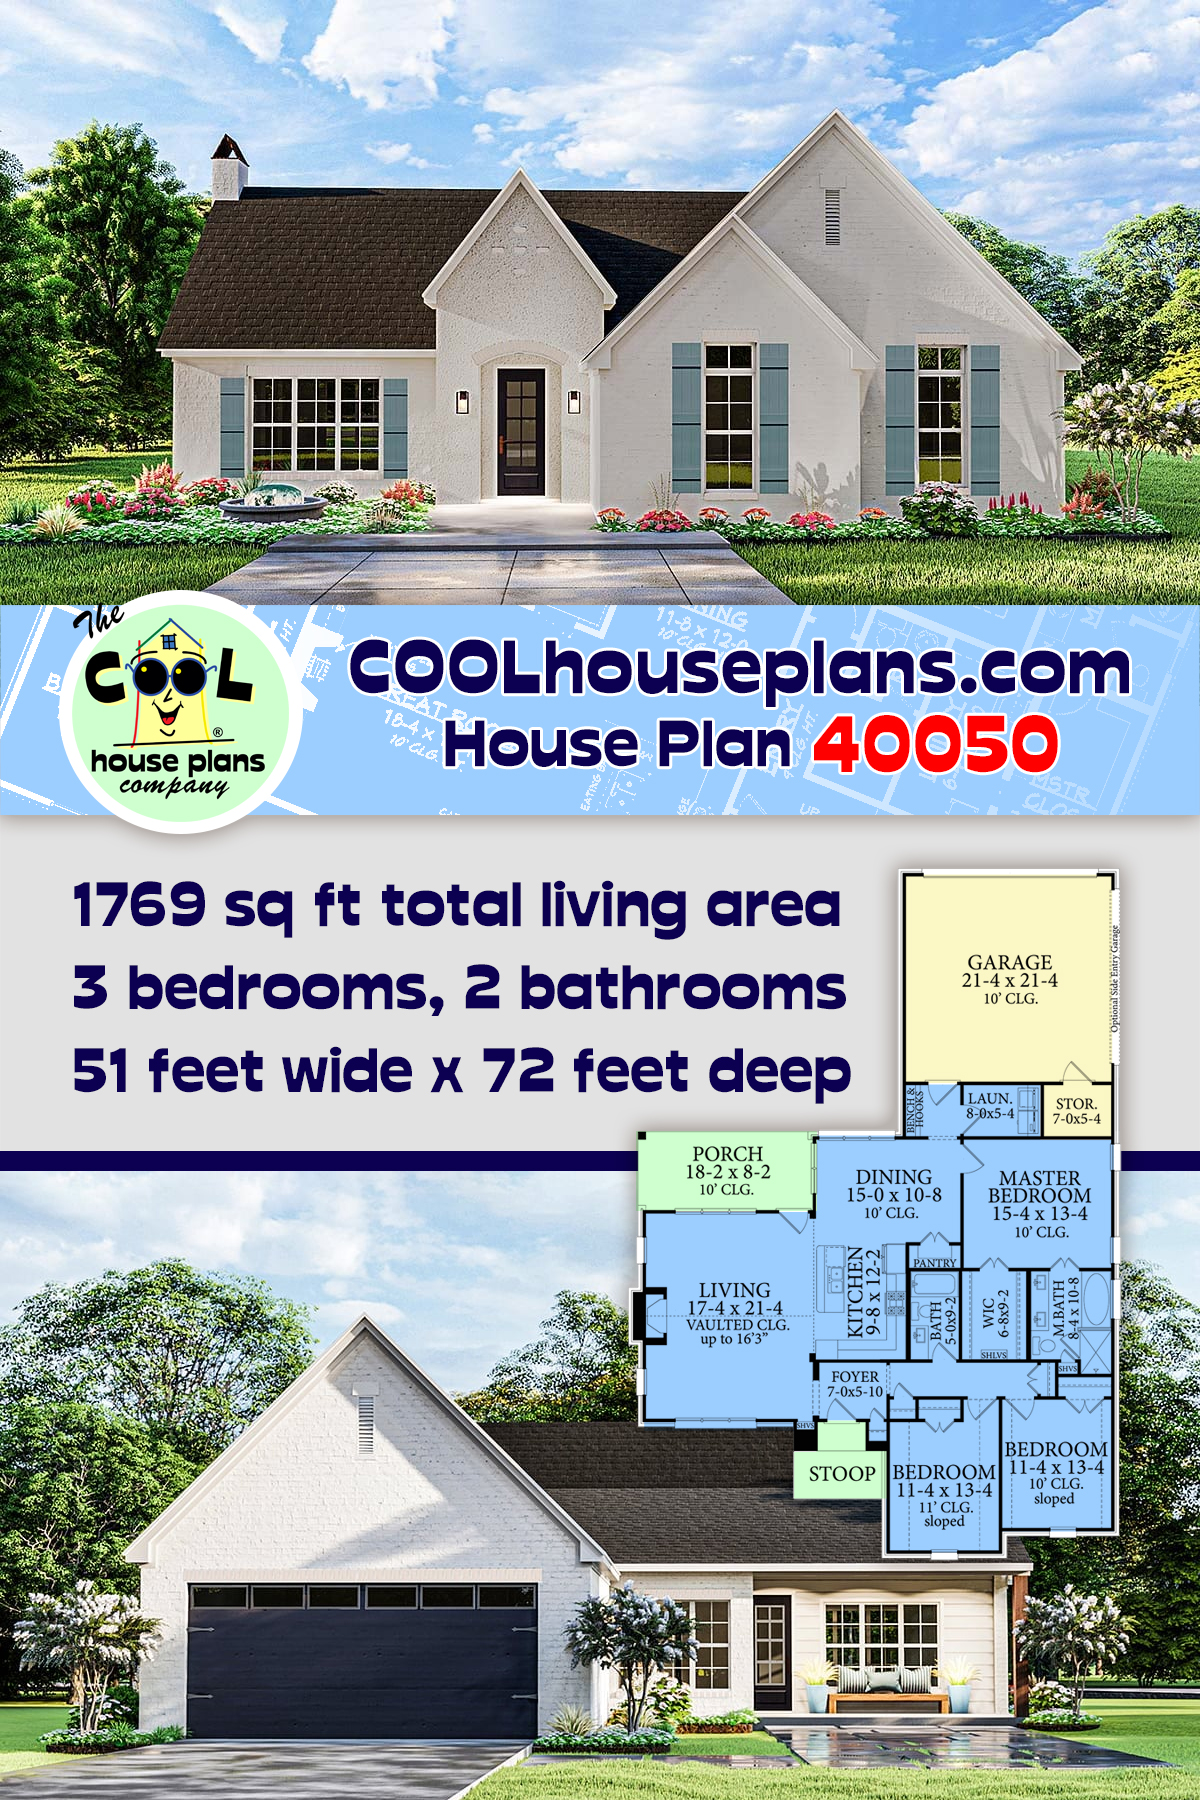 Cottage, French Country, Traditional House Plan 40050 with 3 Beds, 2 Baths, 2 Car Garage